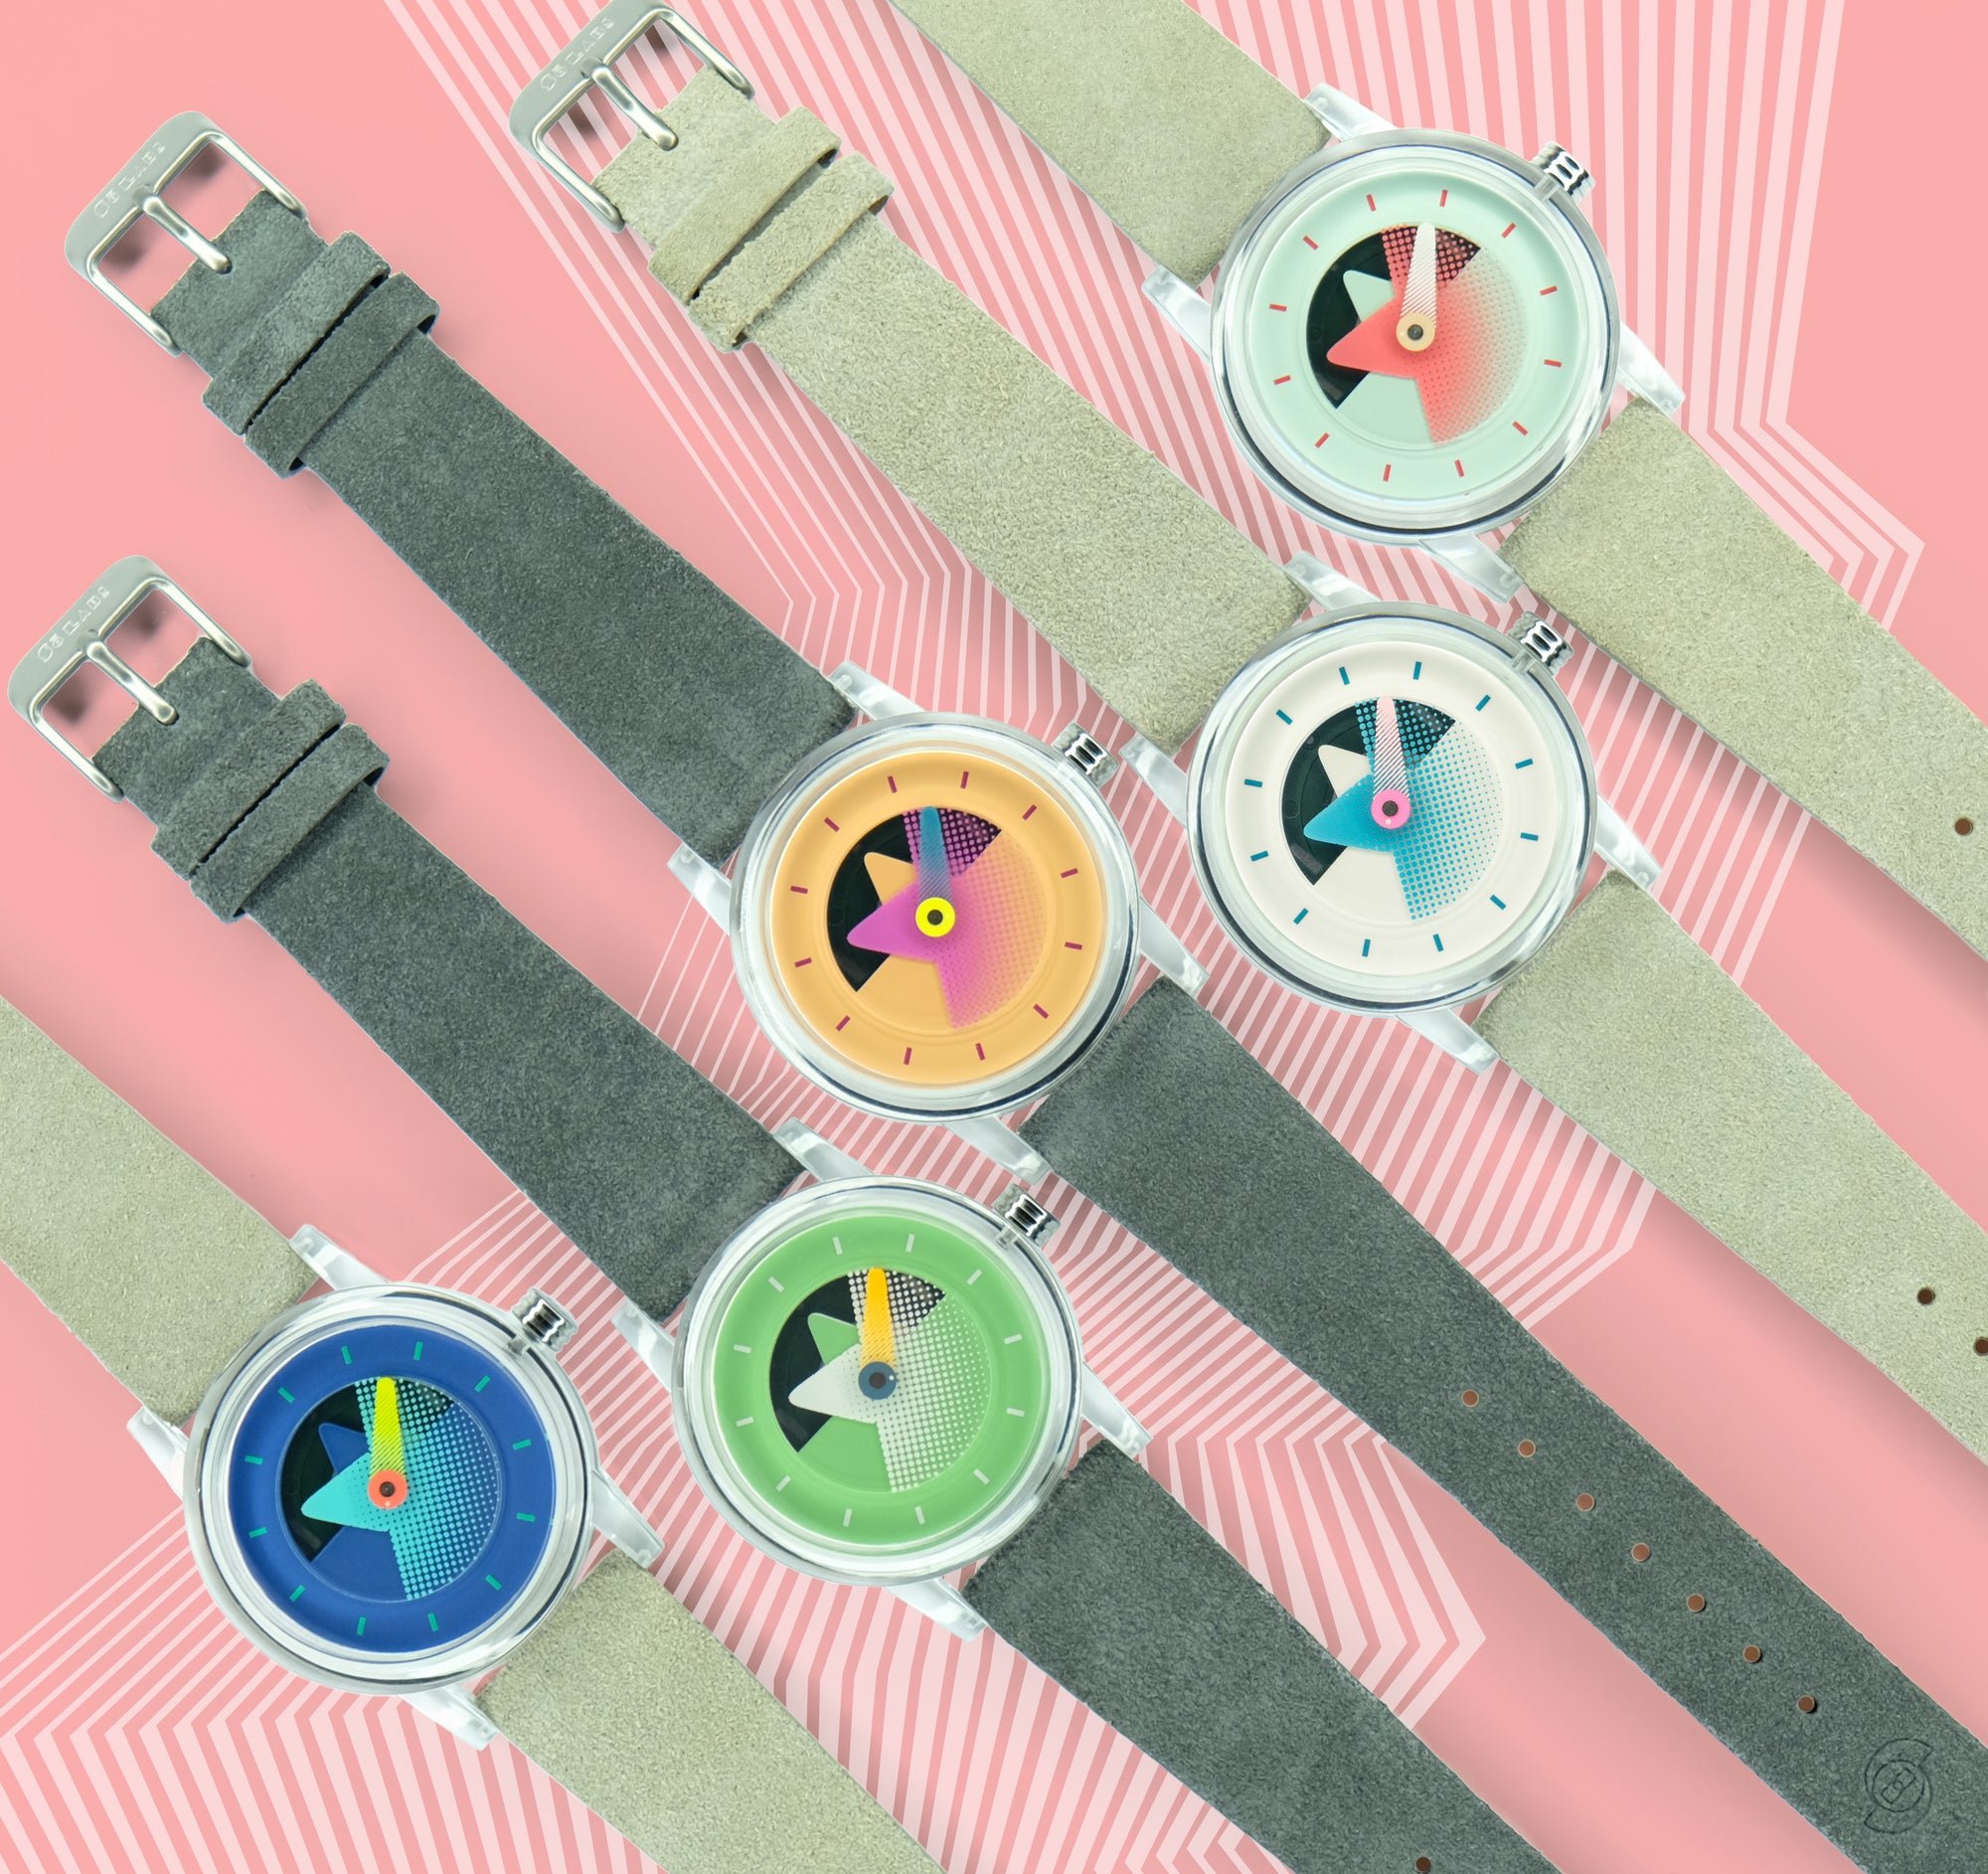 Sō Labs Layer One Quartz Watch Watches Olympic Sky Emerald Rhino Salmon Fandango Abalone Steel Turkish Coral @solabs Solabs So Labs so-labs.co Limited Edition Funky Fun Holiday Gift Watches Timepiece clear